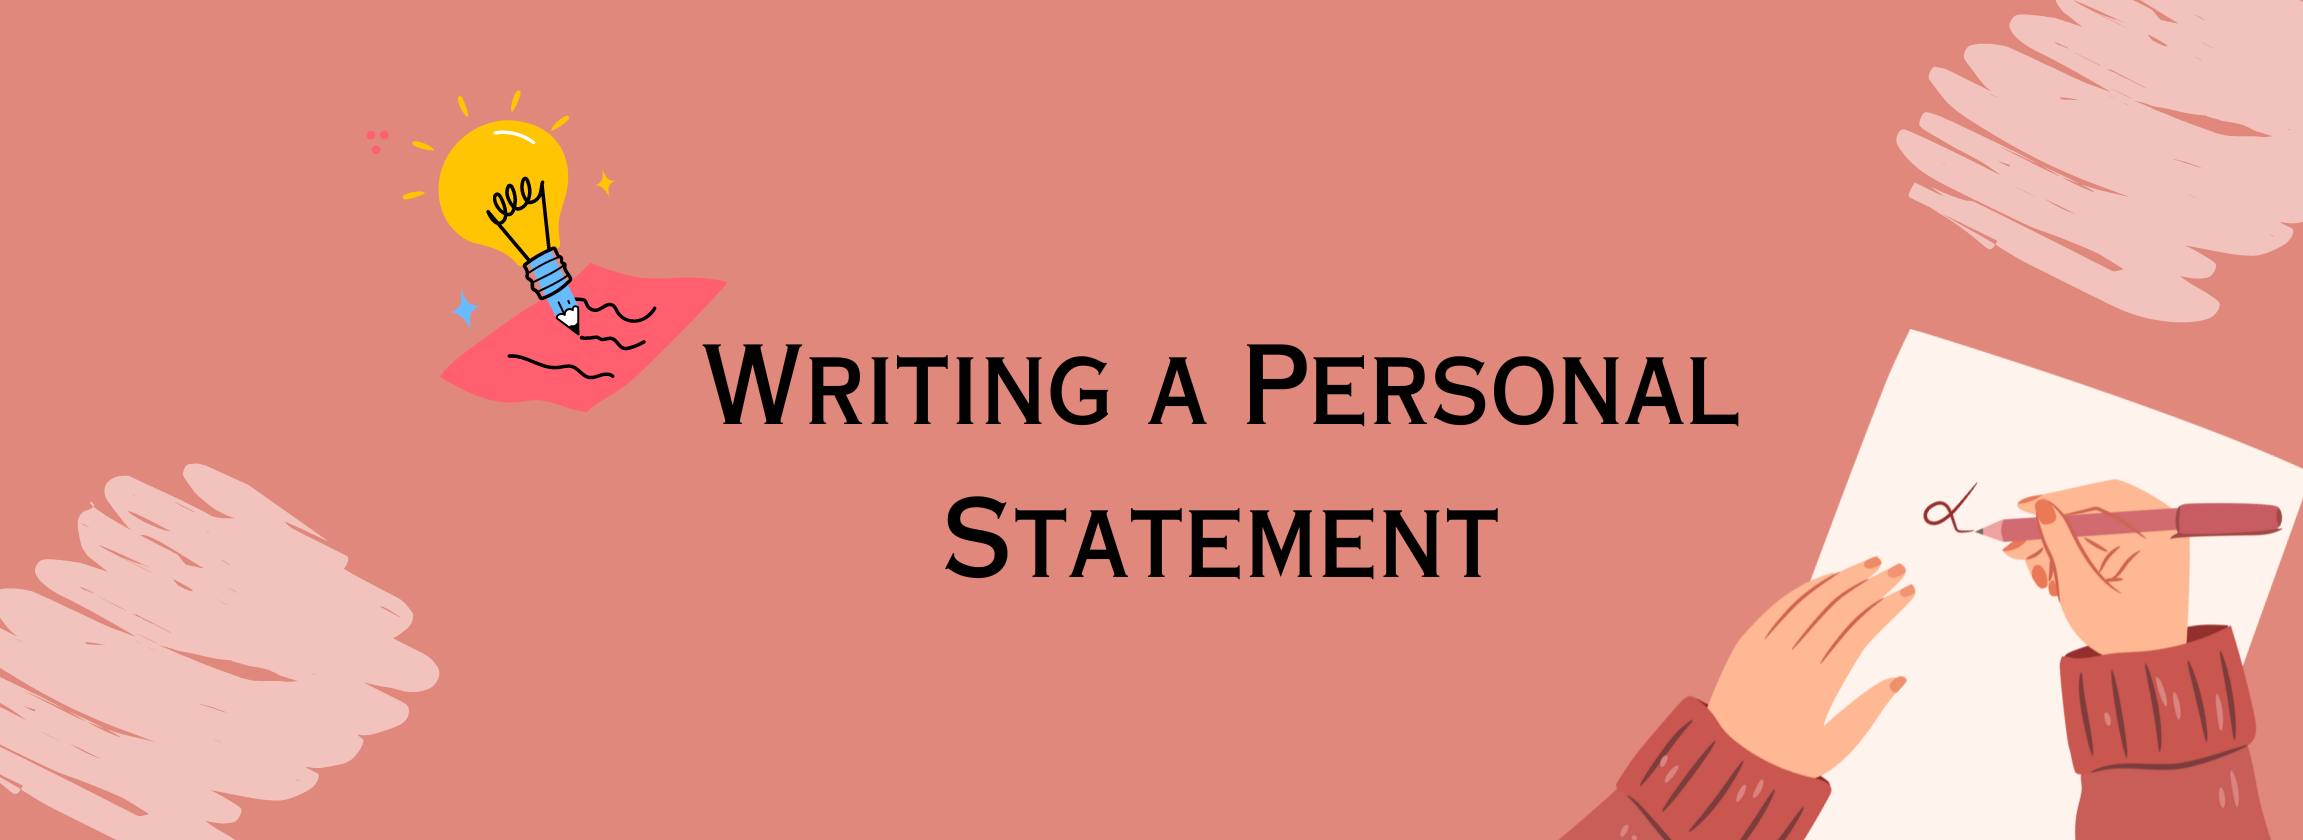 a general personal statement